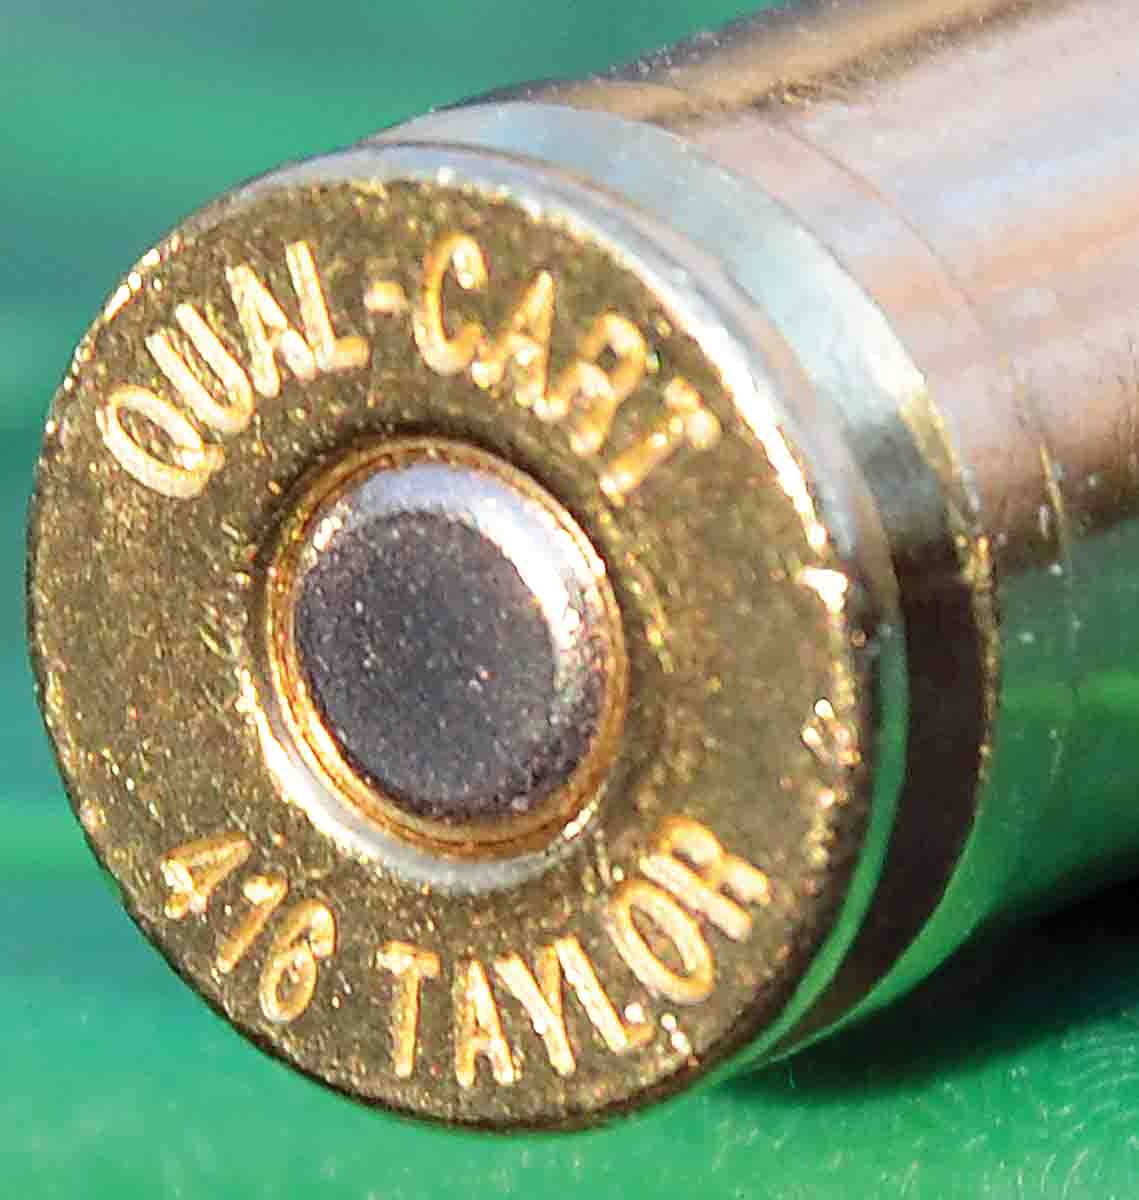 Using cases from Quality Cartridge with the .416 Taylor headstamp can avoid the possibility of being hassled by custom officers in some African countries, due to different caliber markings on the barrel of a rifle and the ammunition accompanying it.